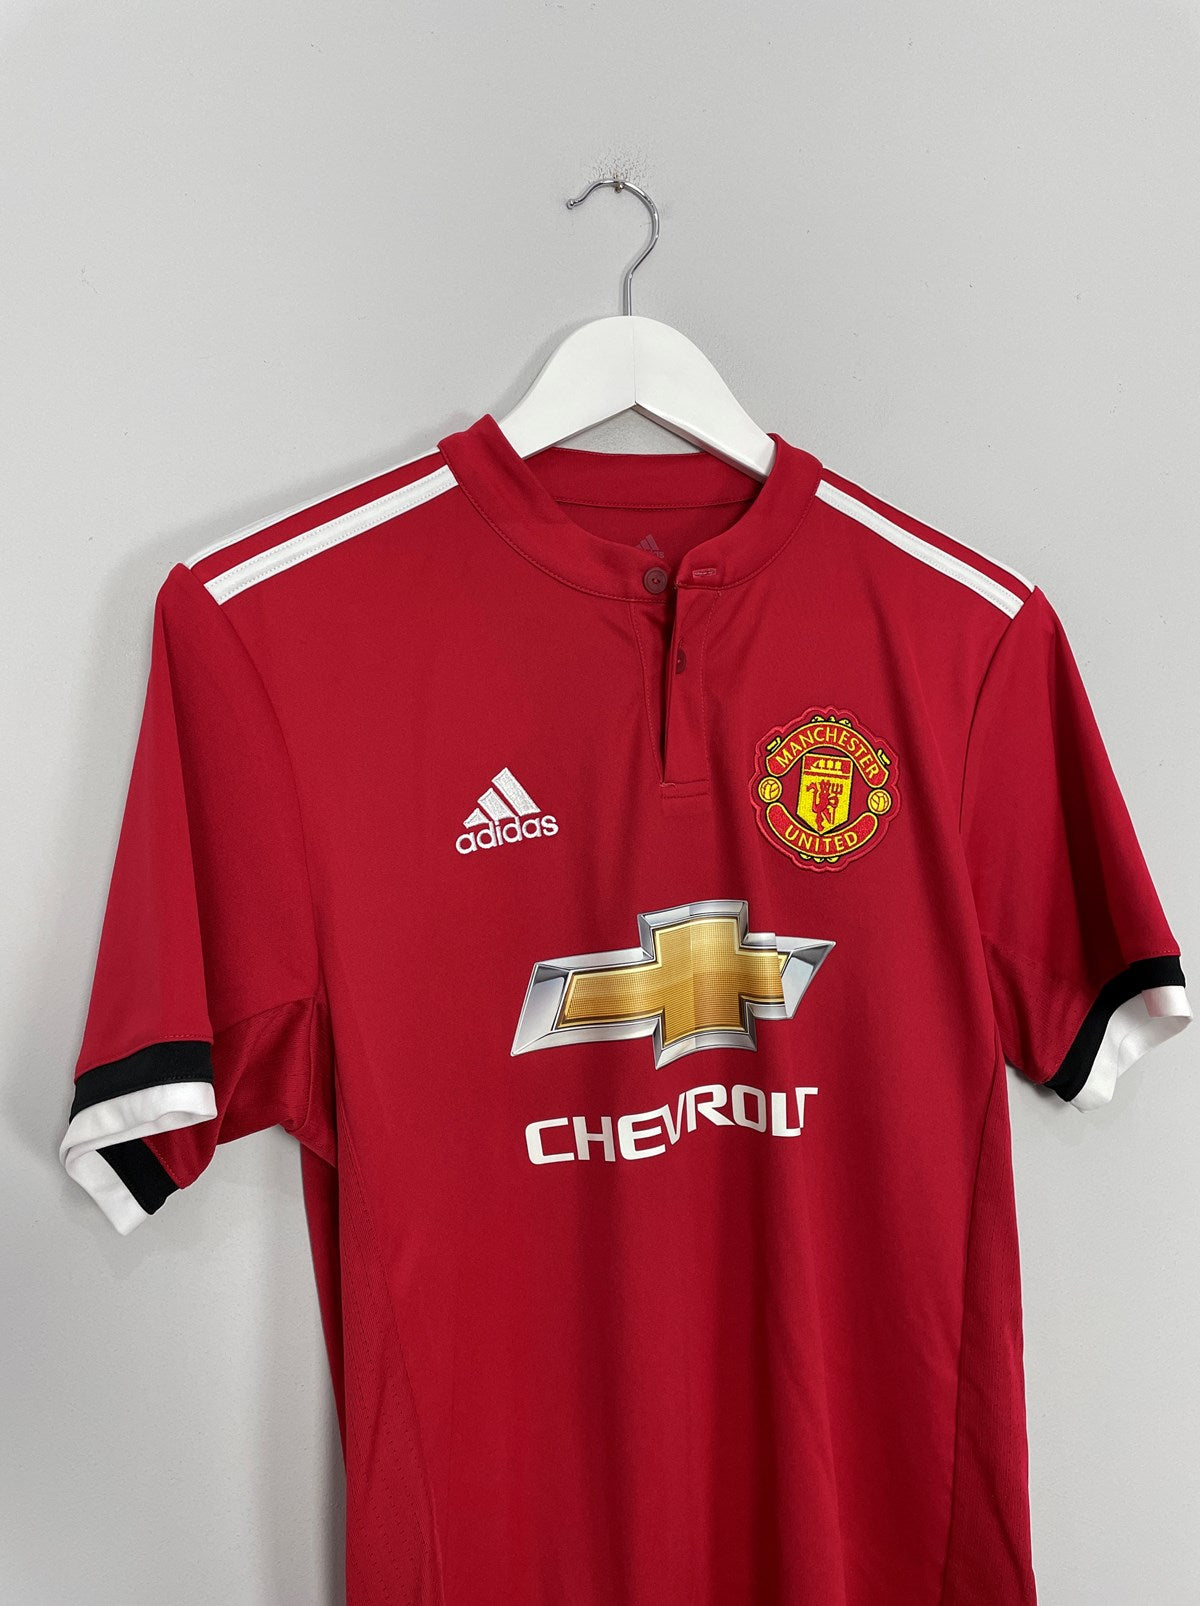 2017/18 MANCHESTER UNITED HOME SHIRT (S) ADIDAS